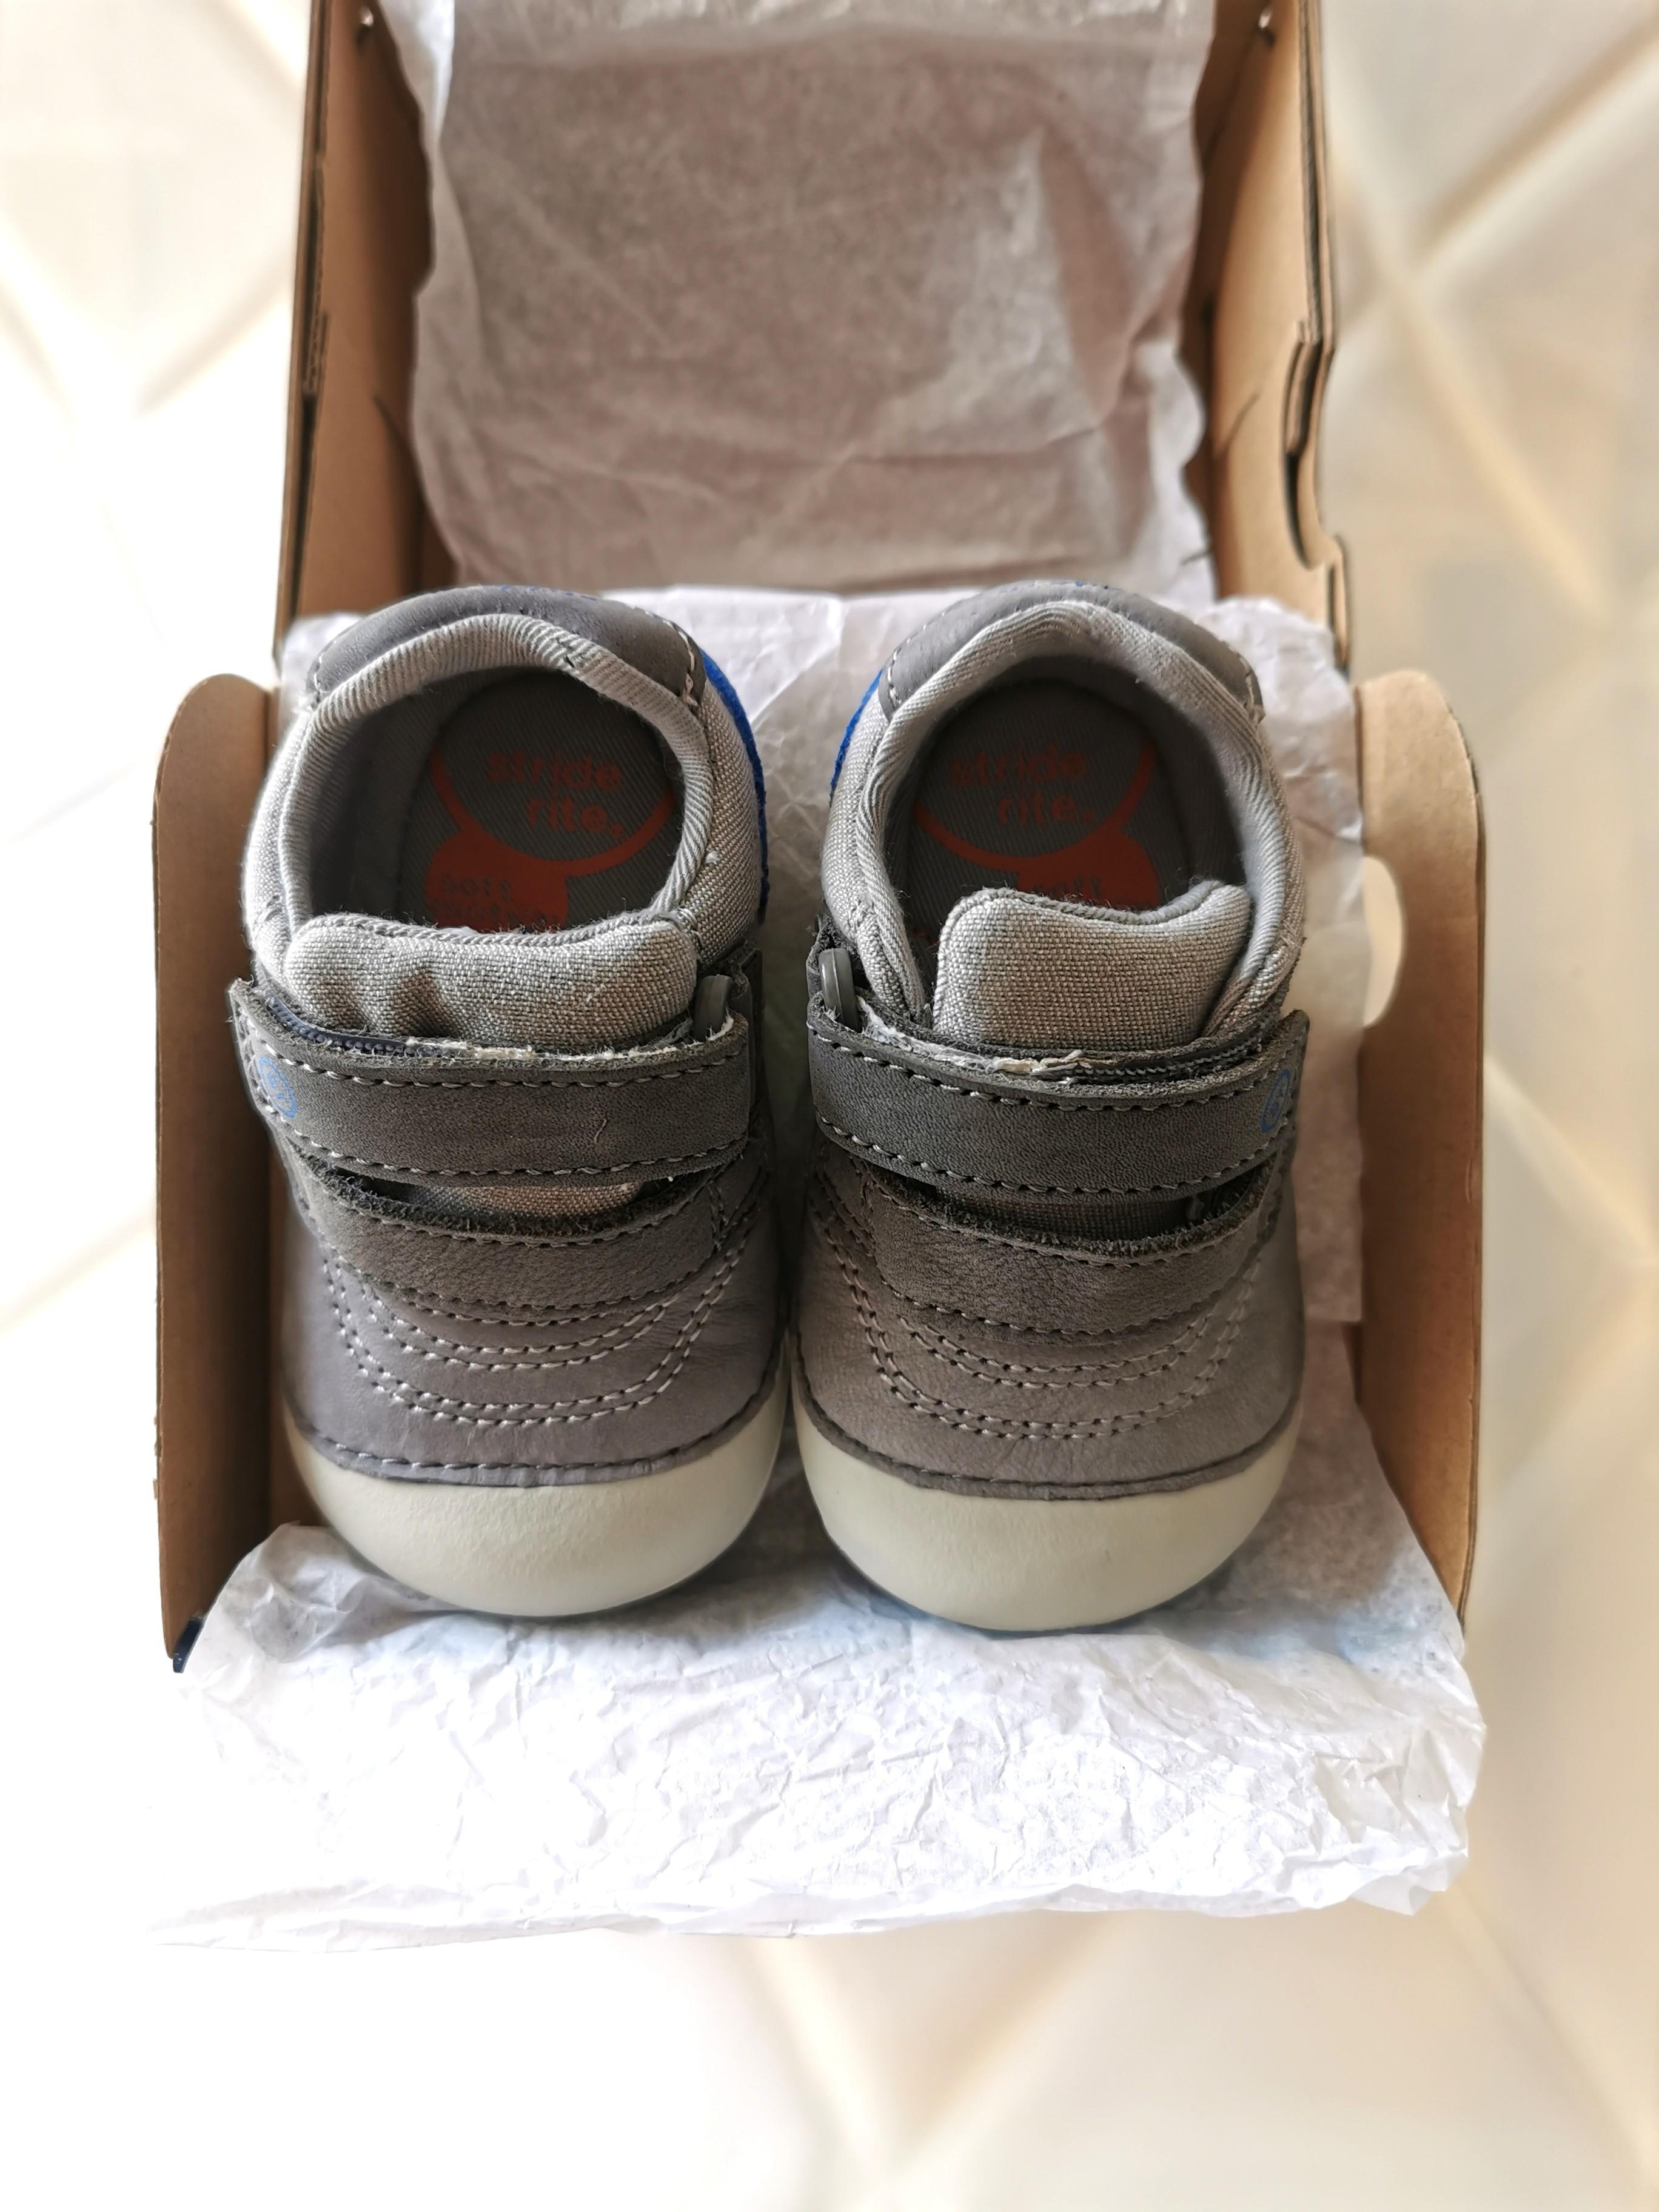 size 2 first walking shoes